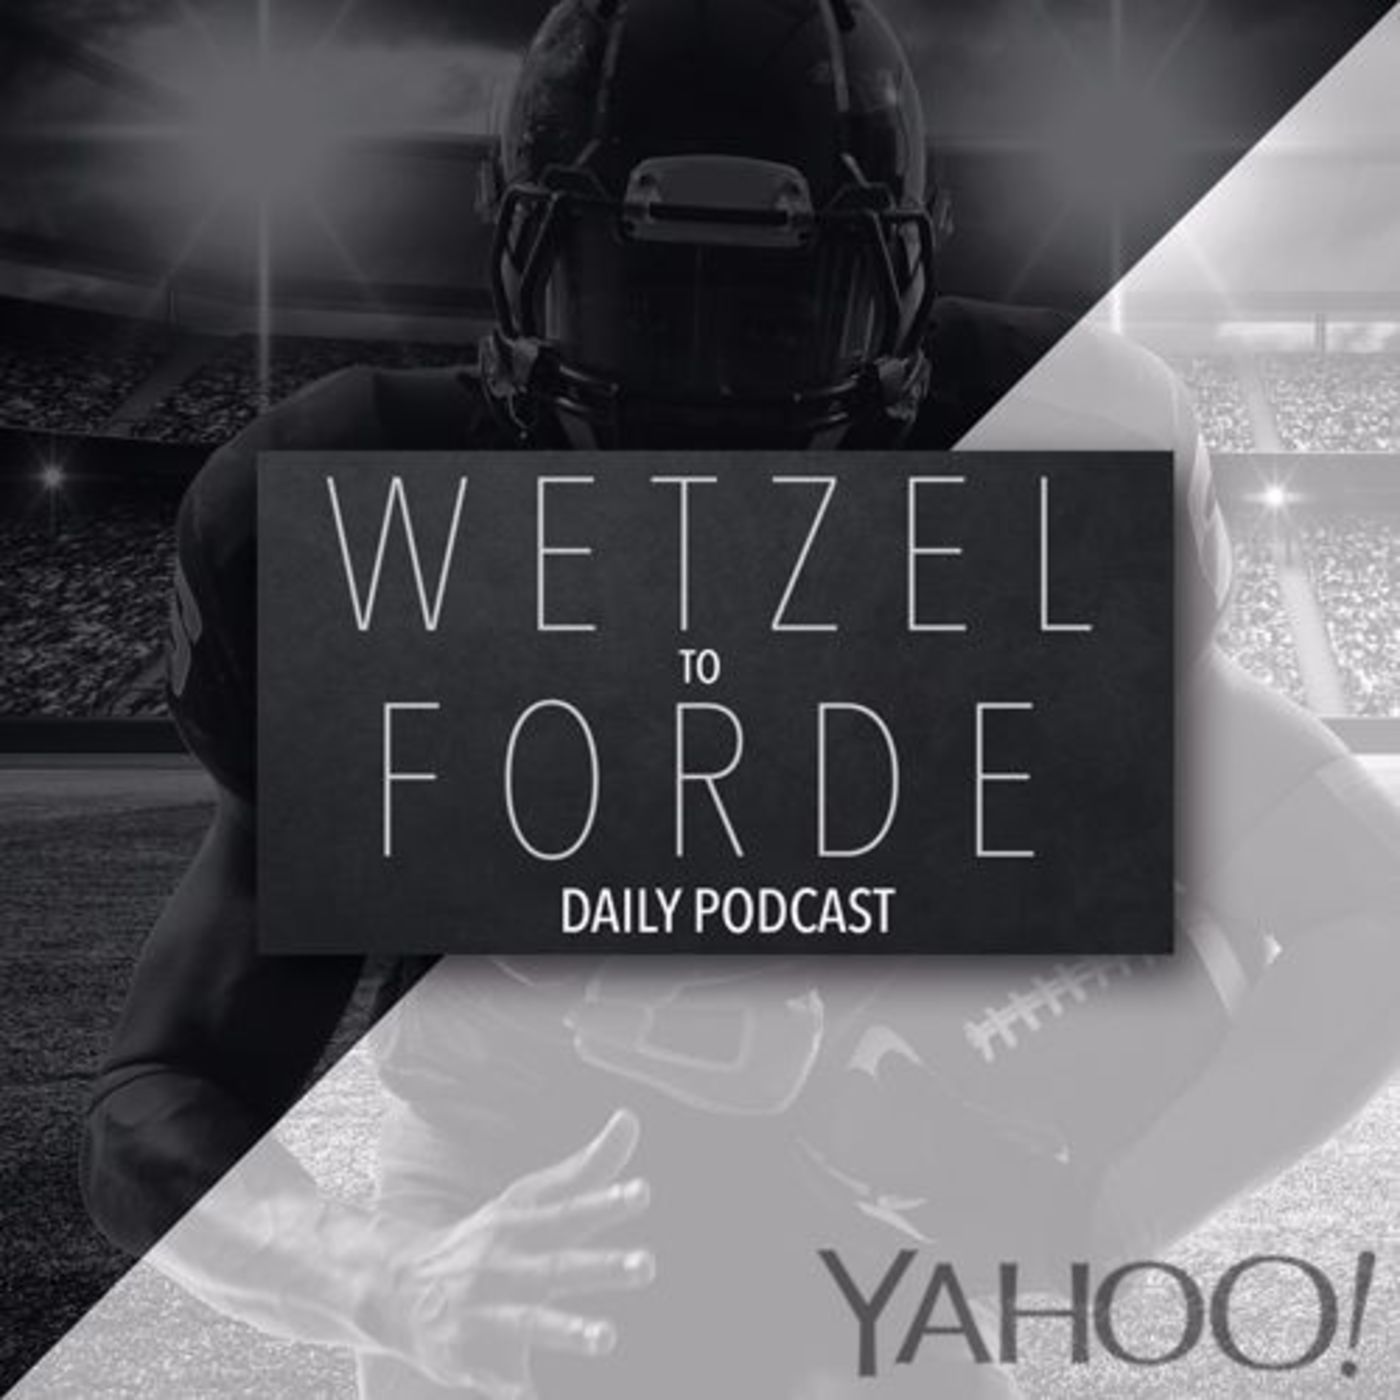 Should sports get involved in political compaigns? Wetzel To Forde (3 - 1-16)